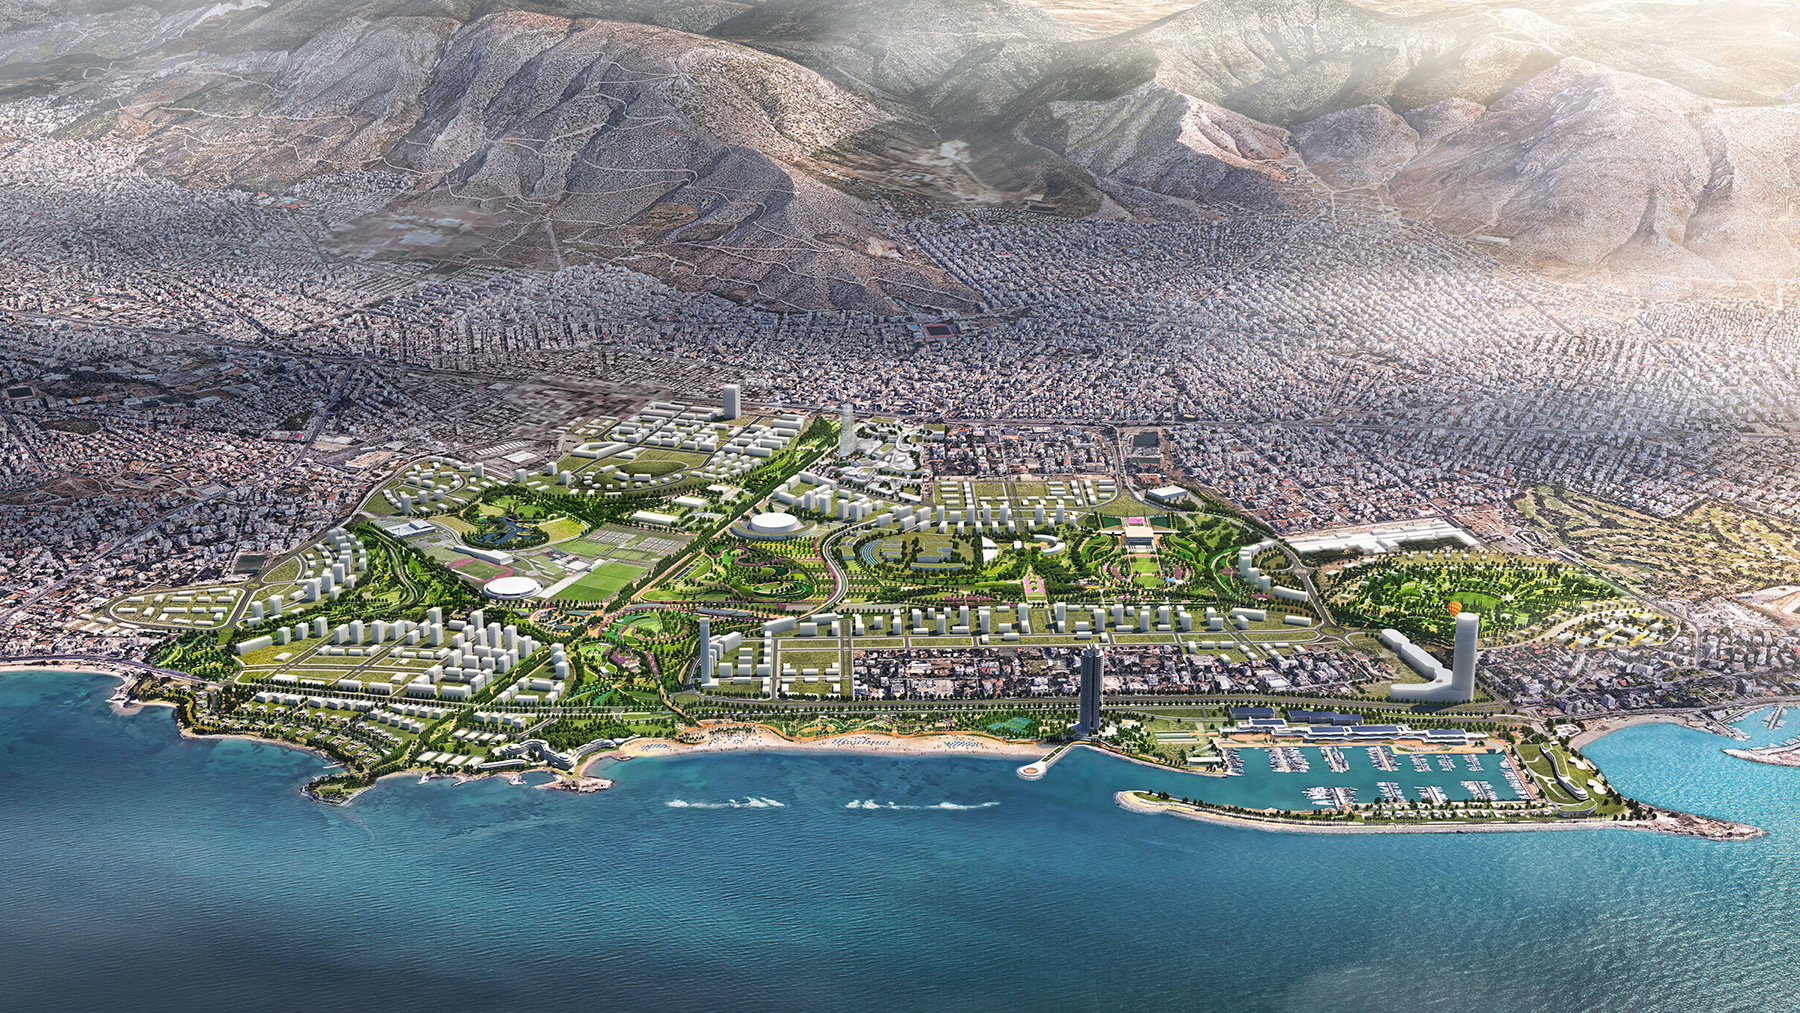 An aerial view of the development shows the Ellinikon Metropolitan Park in the center, housing near the coast, commercial and office space in the back, and a revamped athletic training complex (to the left of the park). (Rendering courtesy of Sasaki)